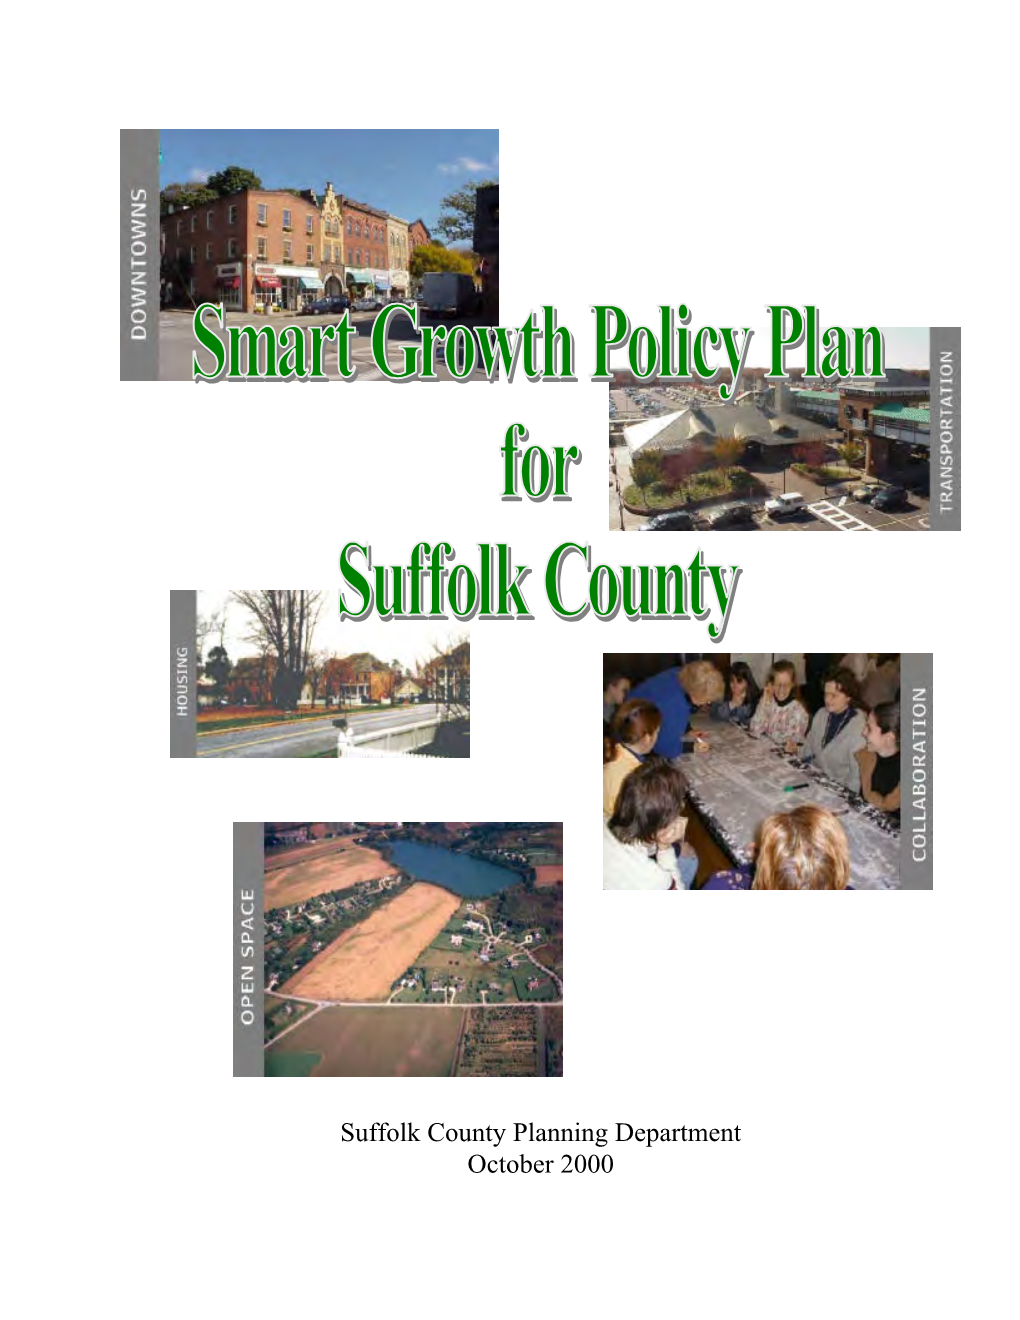 Smart Growth Policy Plan for Suffolk County